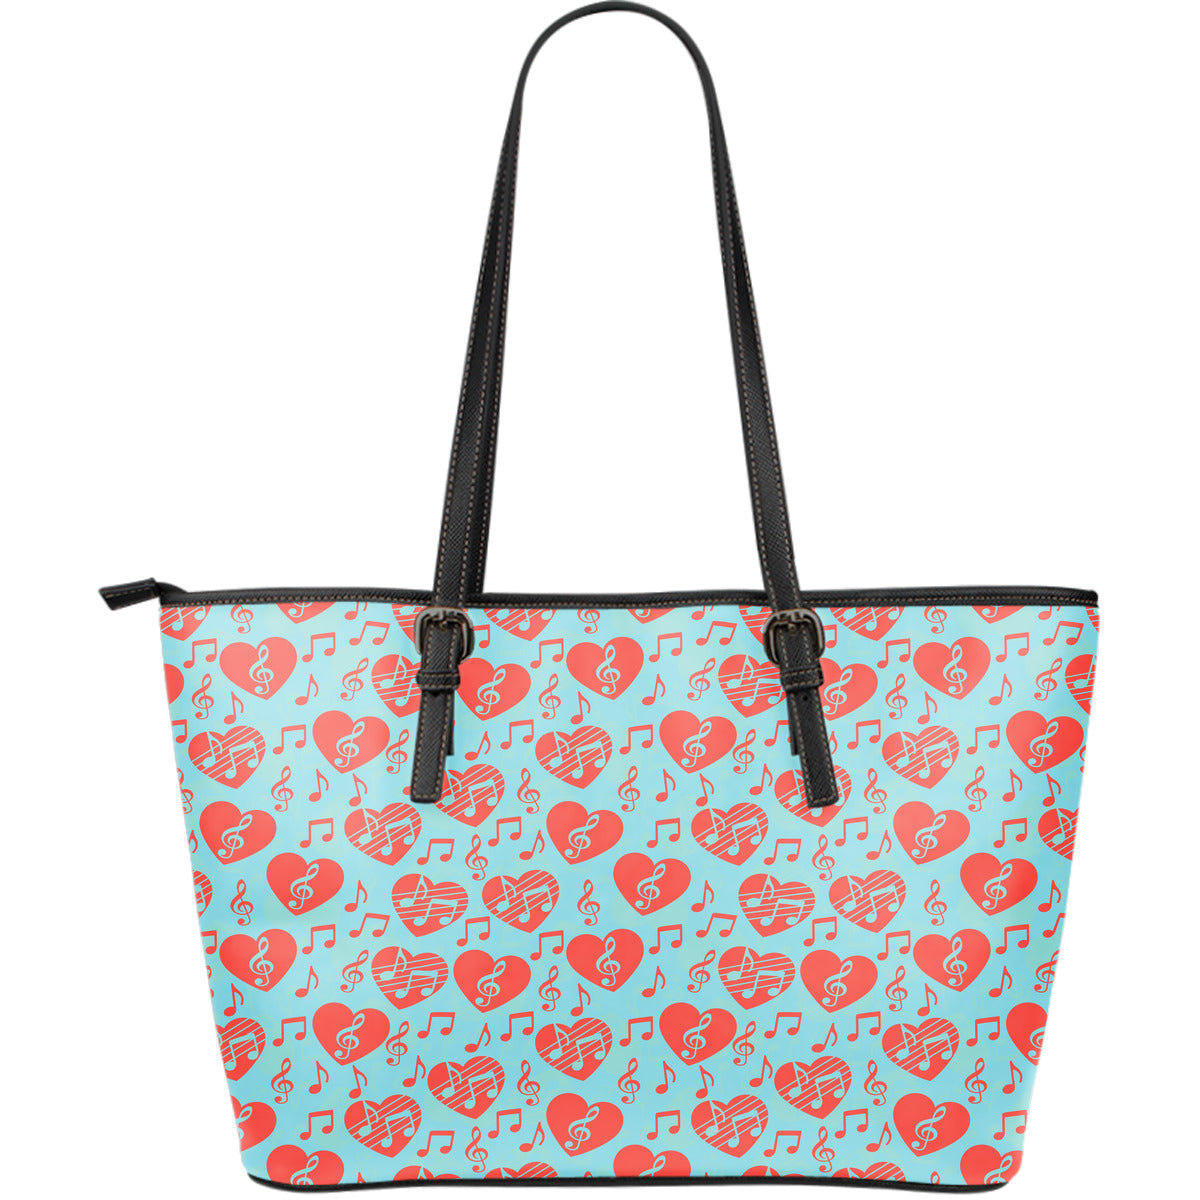 Music Hearts Large Leather Tote Bag - JaZazzy 